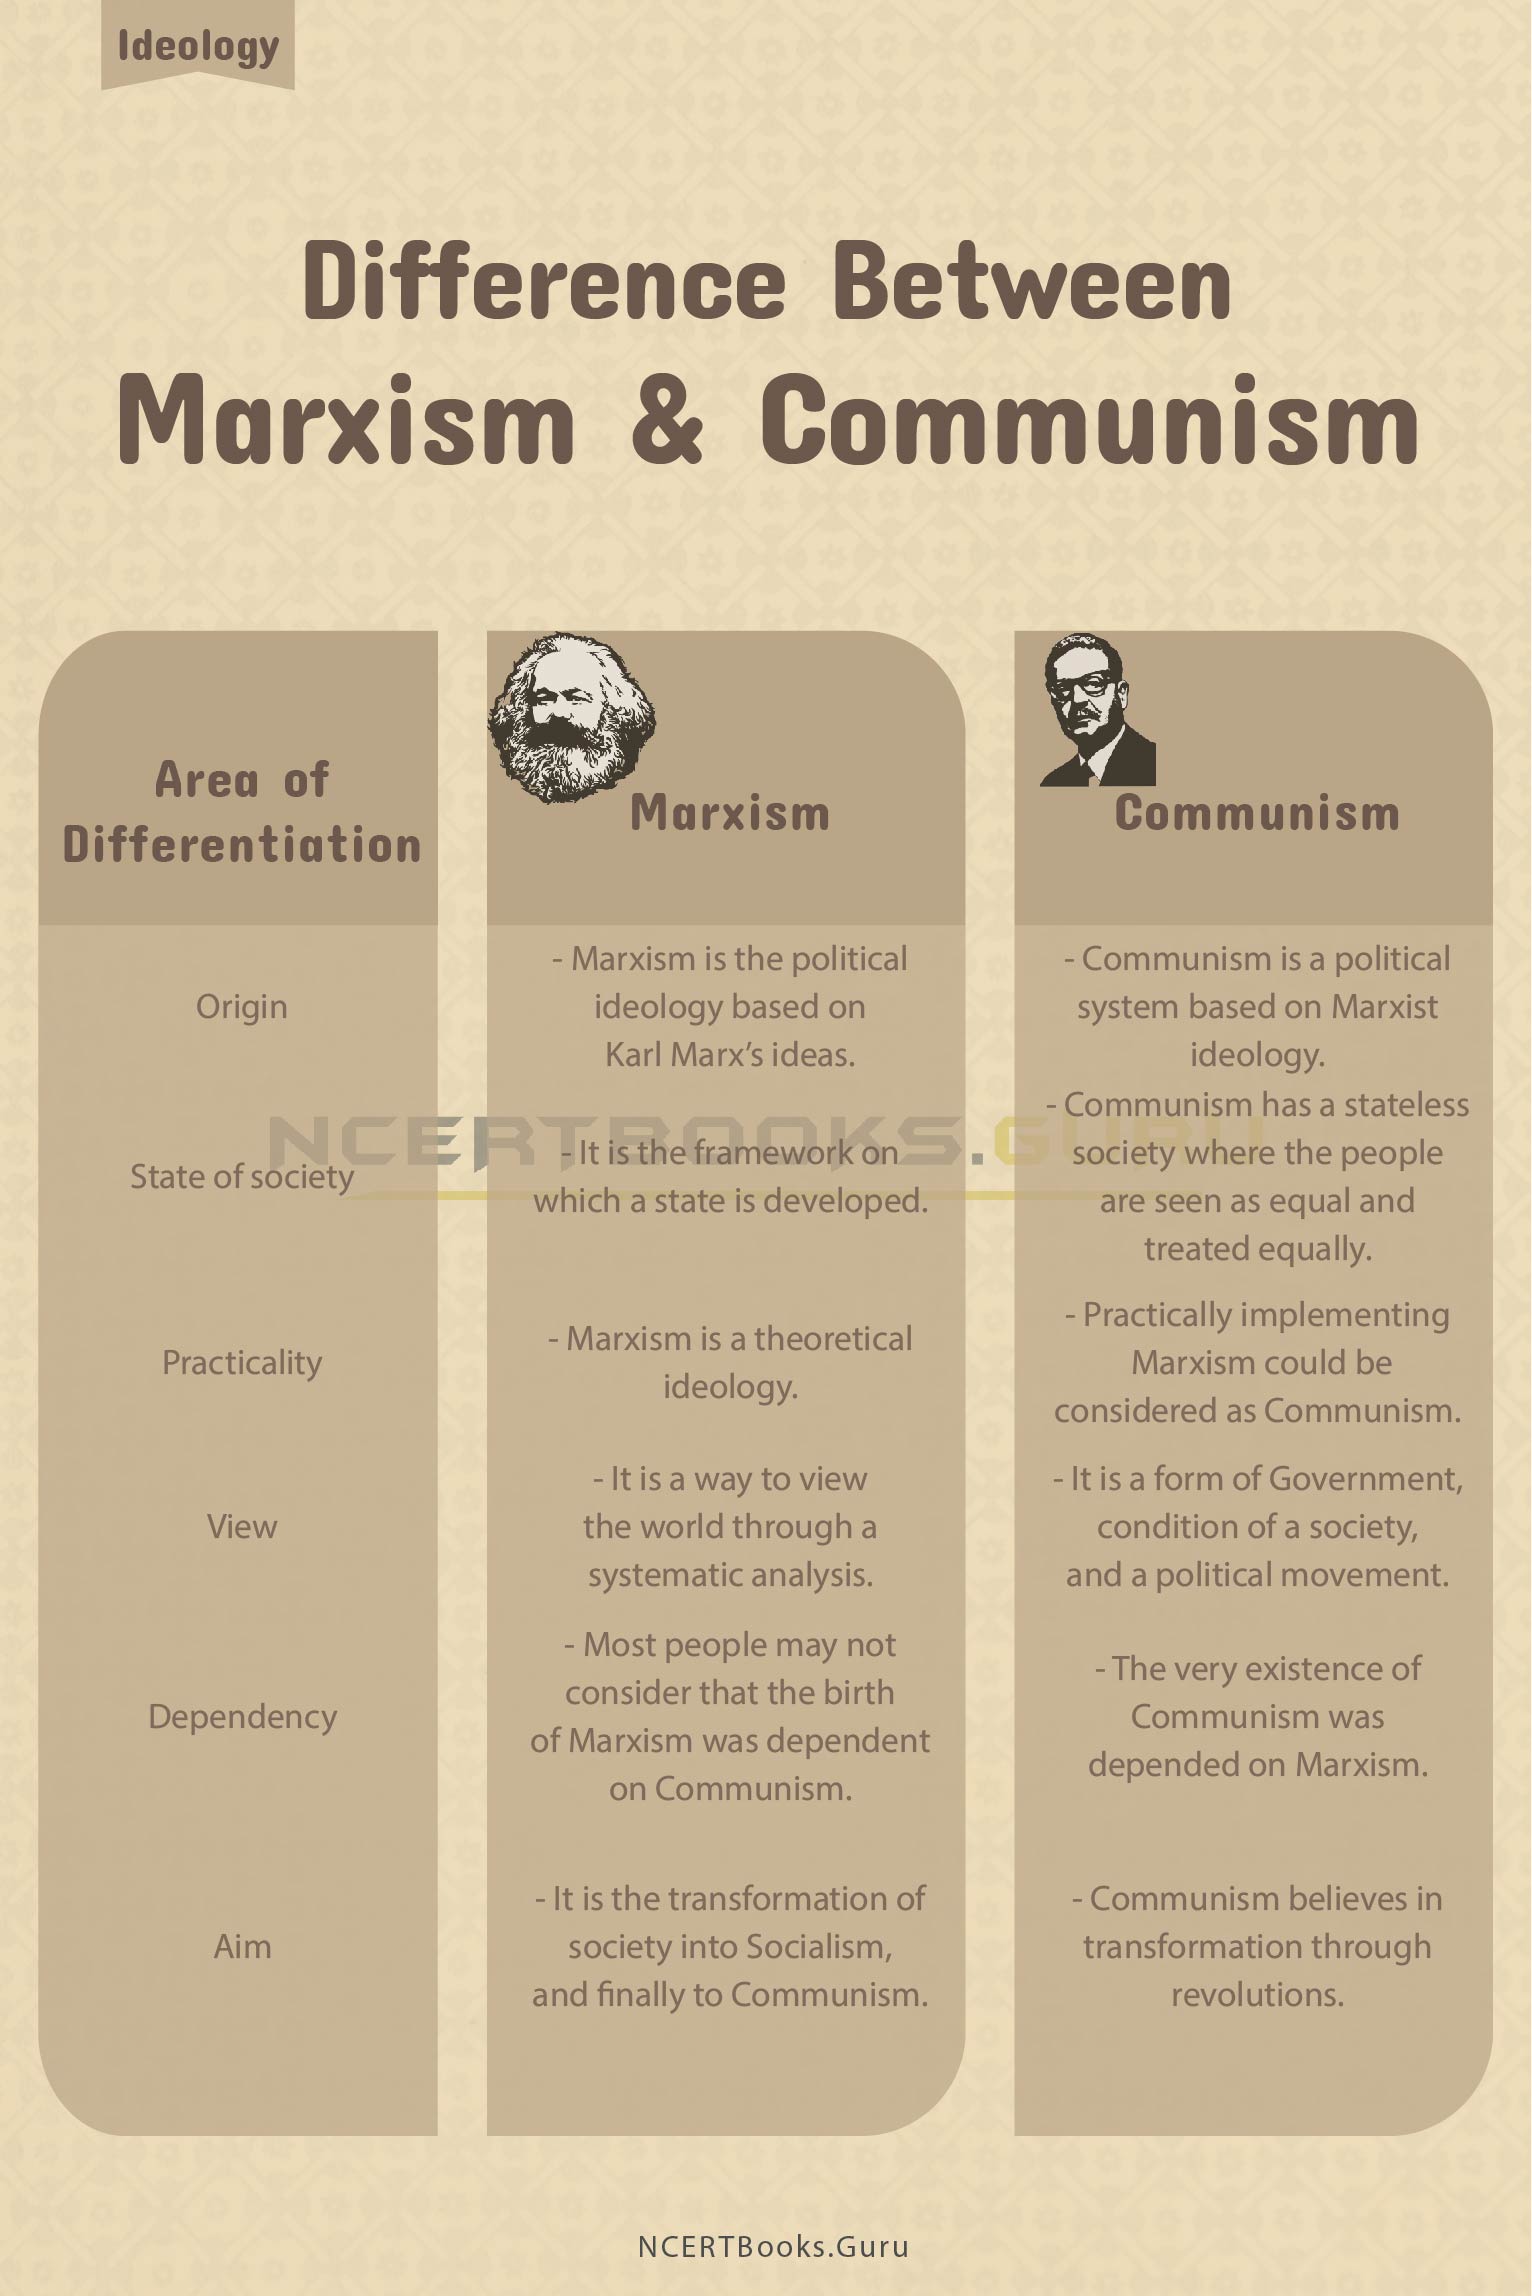 Difference Between Marxism and Communism 2